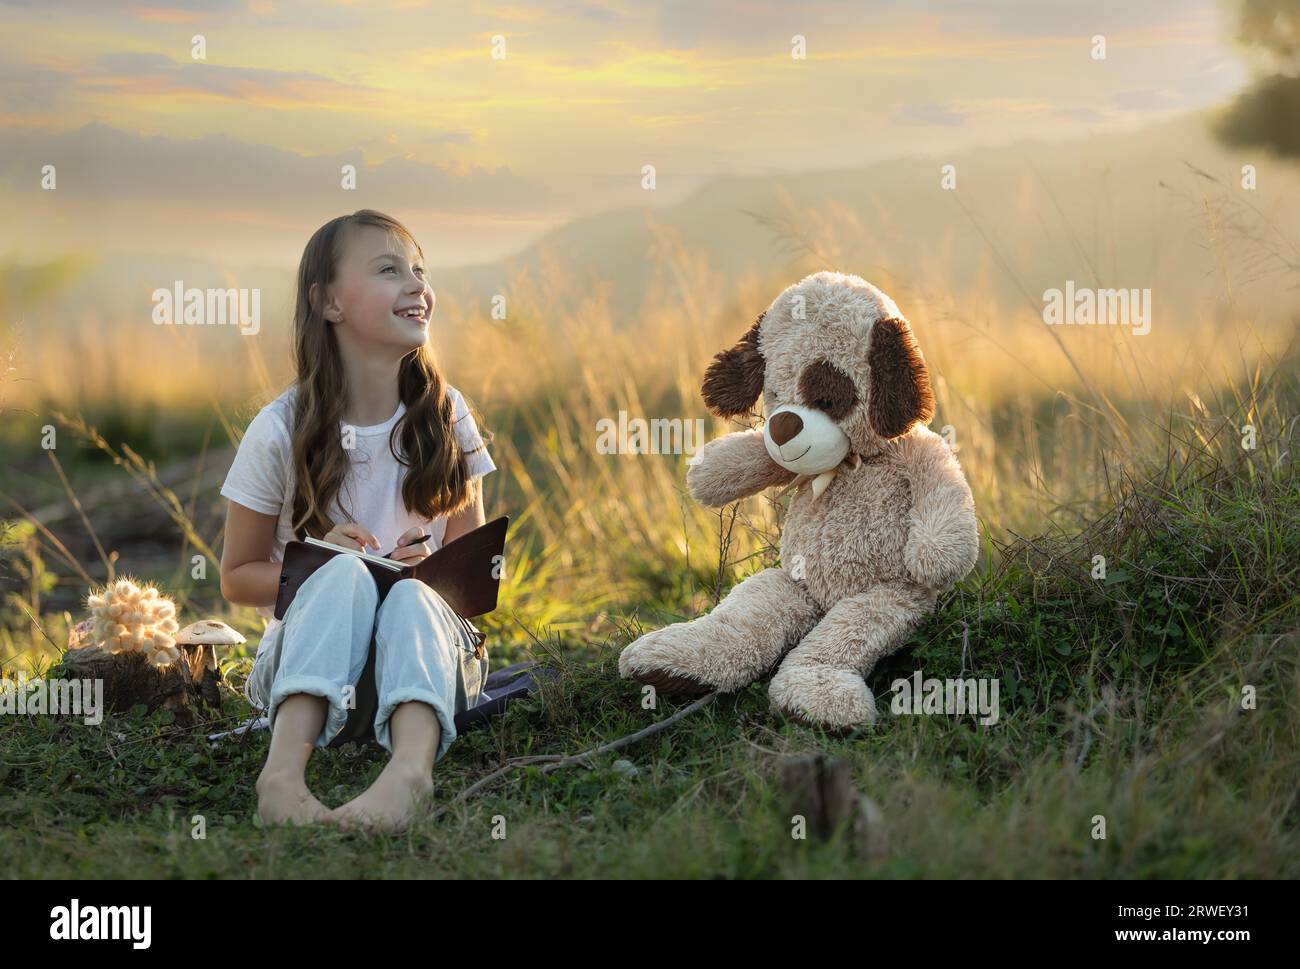 Young, smiling girl sitting in nature at sunset with her teddy writing in her book Stock Photo